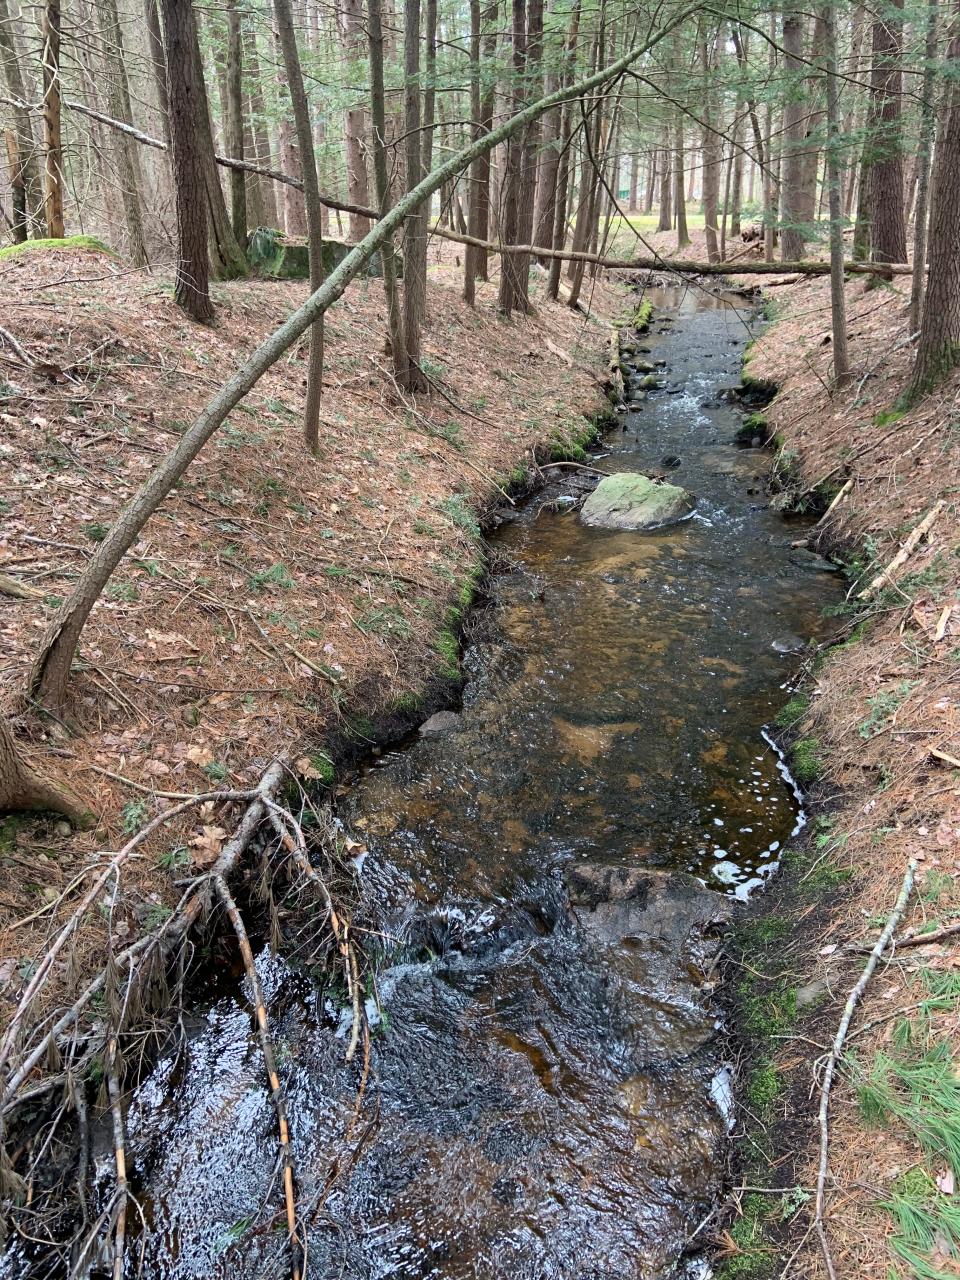 The Massachusetts Department of Conservation and Recreation has announced the reopening of Otter River State Forest in Baldwinville. The area had been closed to the public while crews cleaned up damage from a late-season snowstorm.